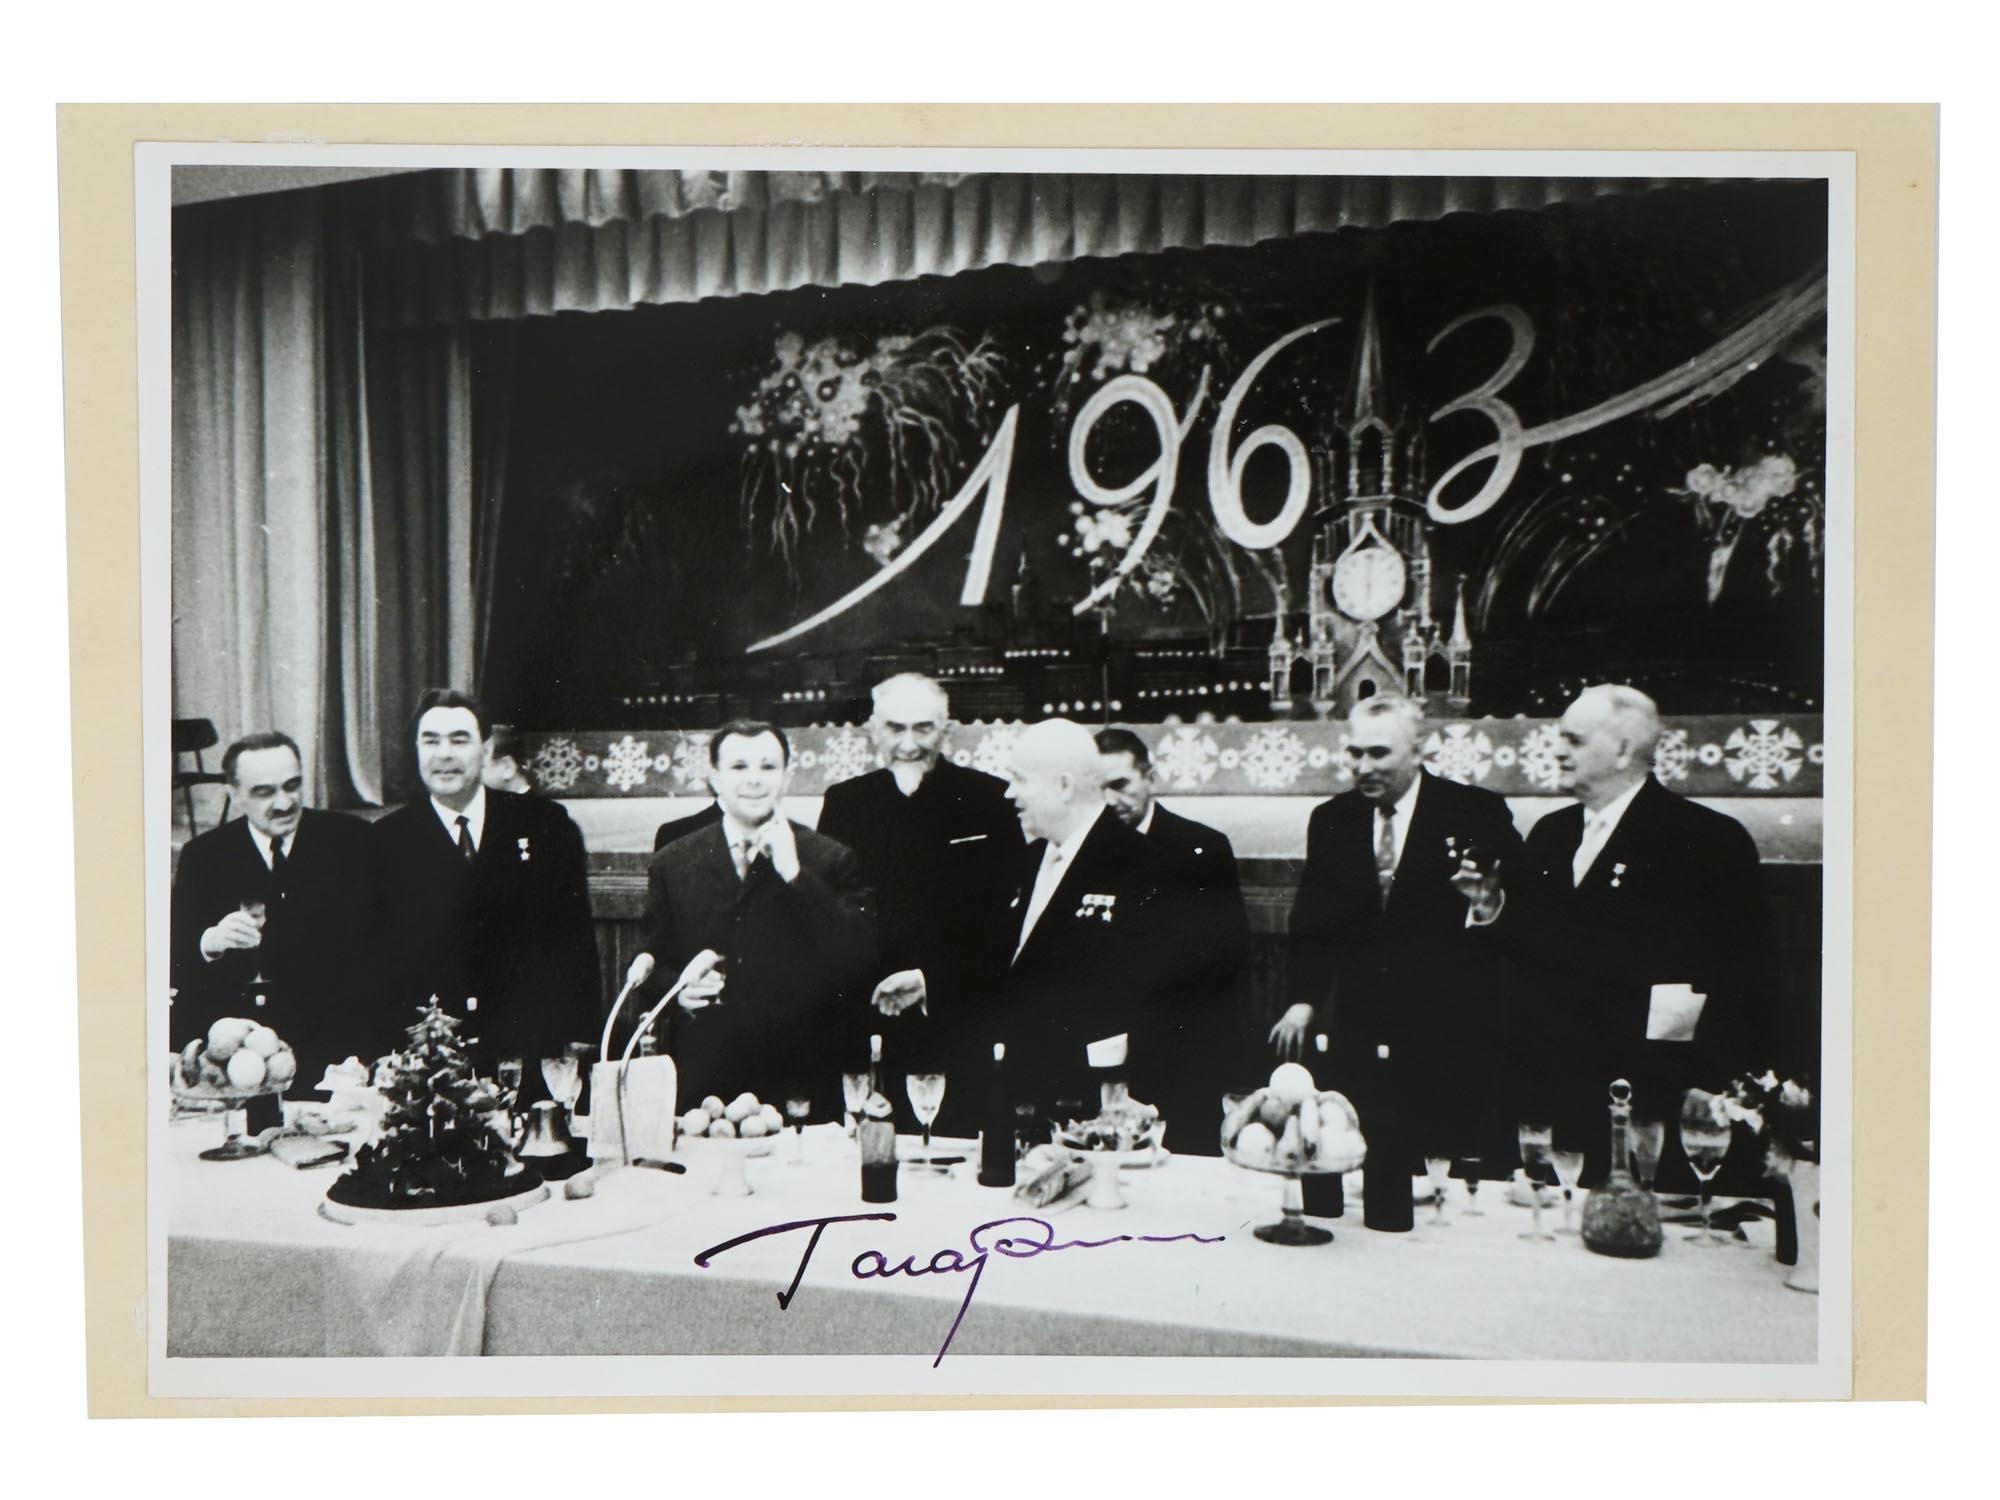 PHOTO OF 1963 NEW YEAR CELEBRATION SIGNED BY GAGARIN PIC-0